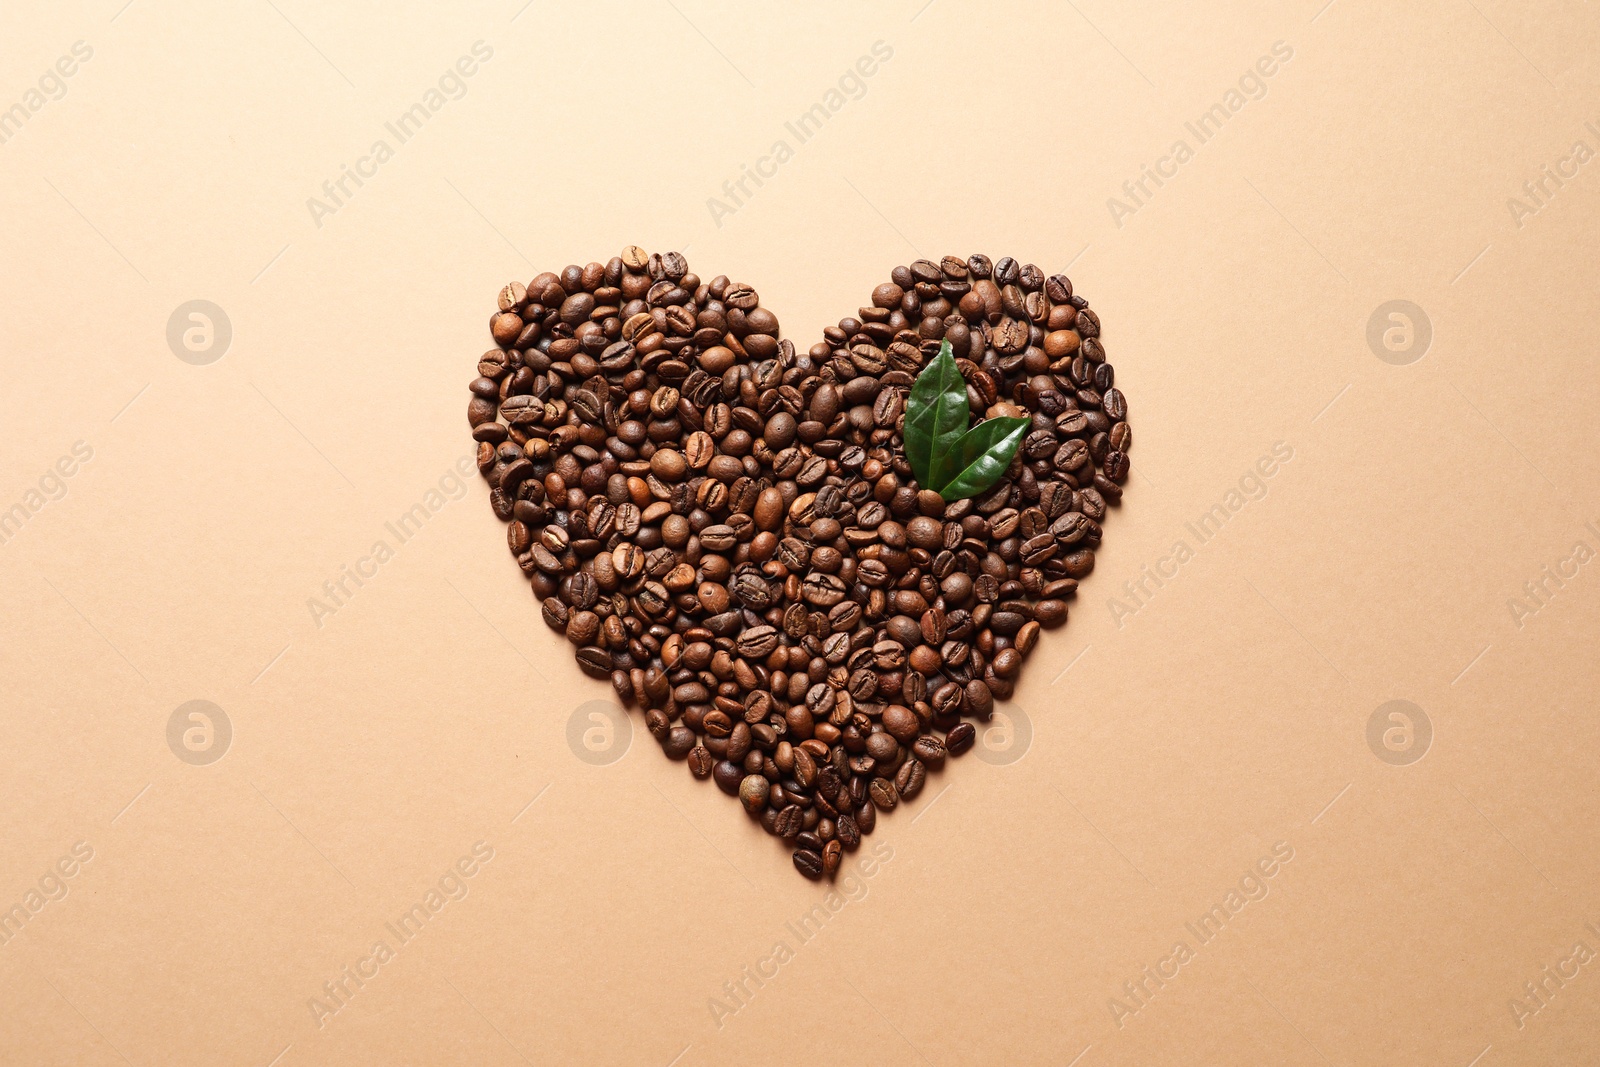 Photo of Heart shaped pile of coffee beans and fresh green leaves on light orange background, top view